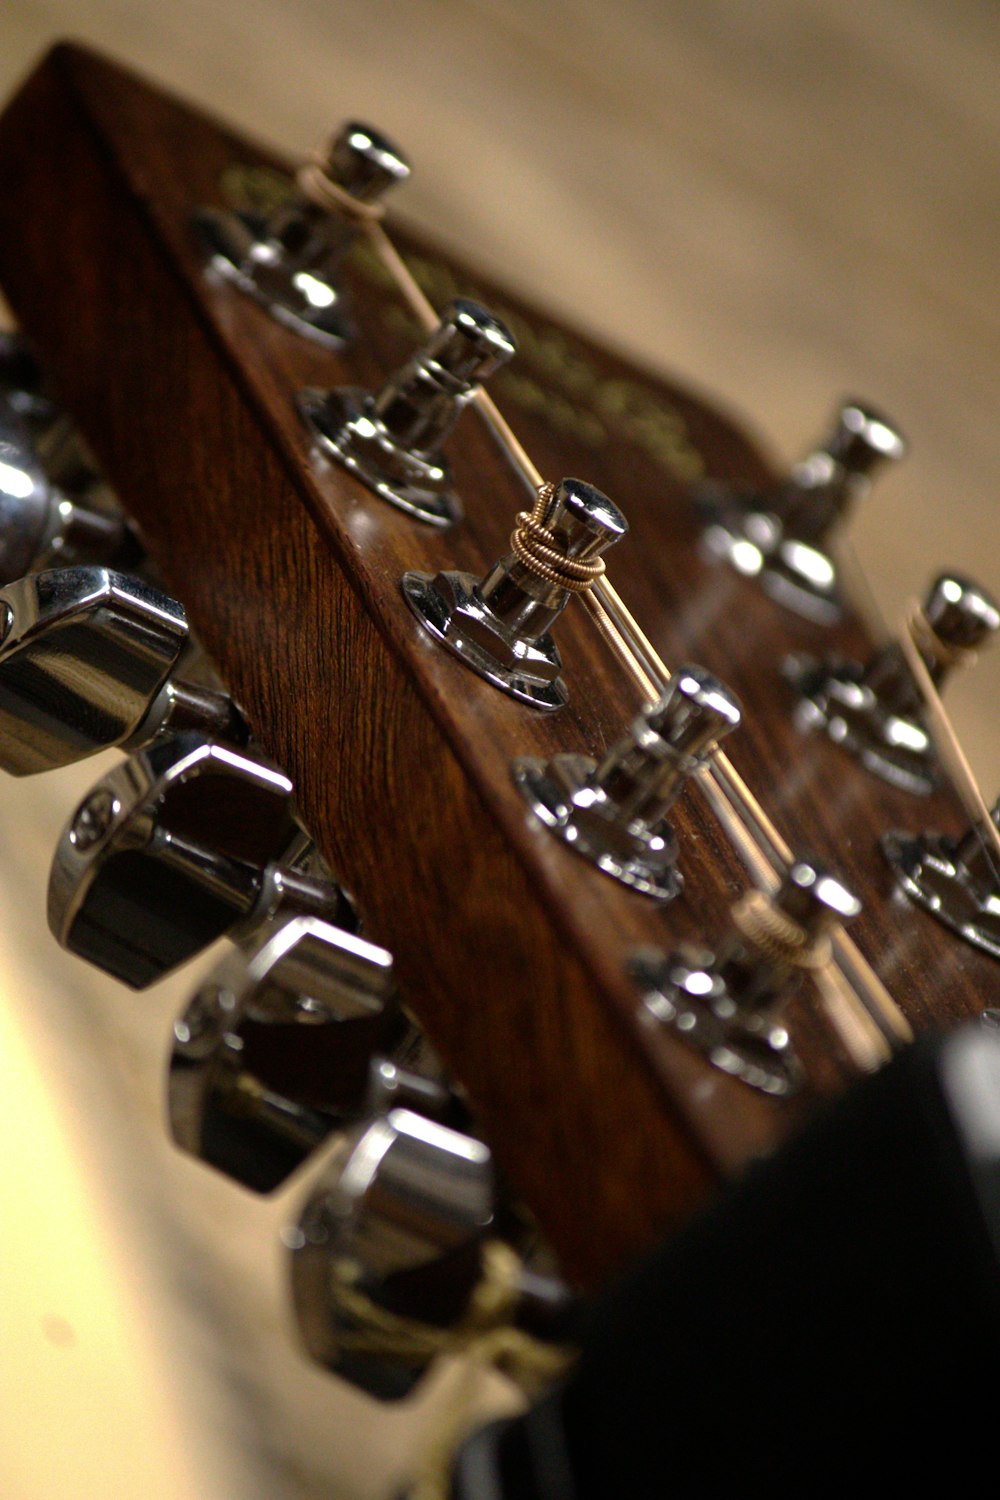 a close up of the heads of a guitar